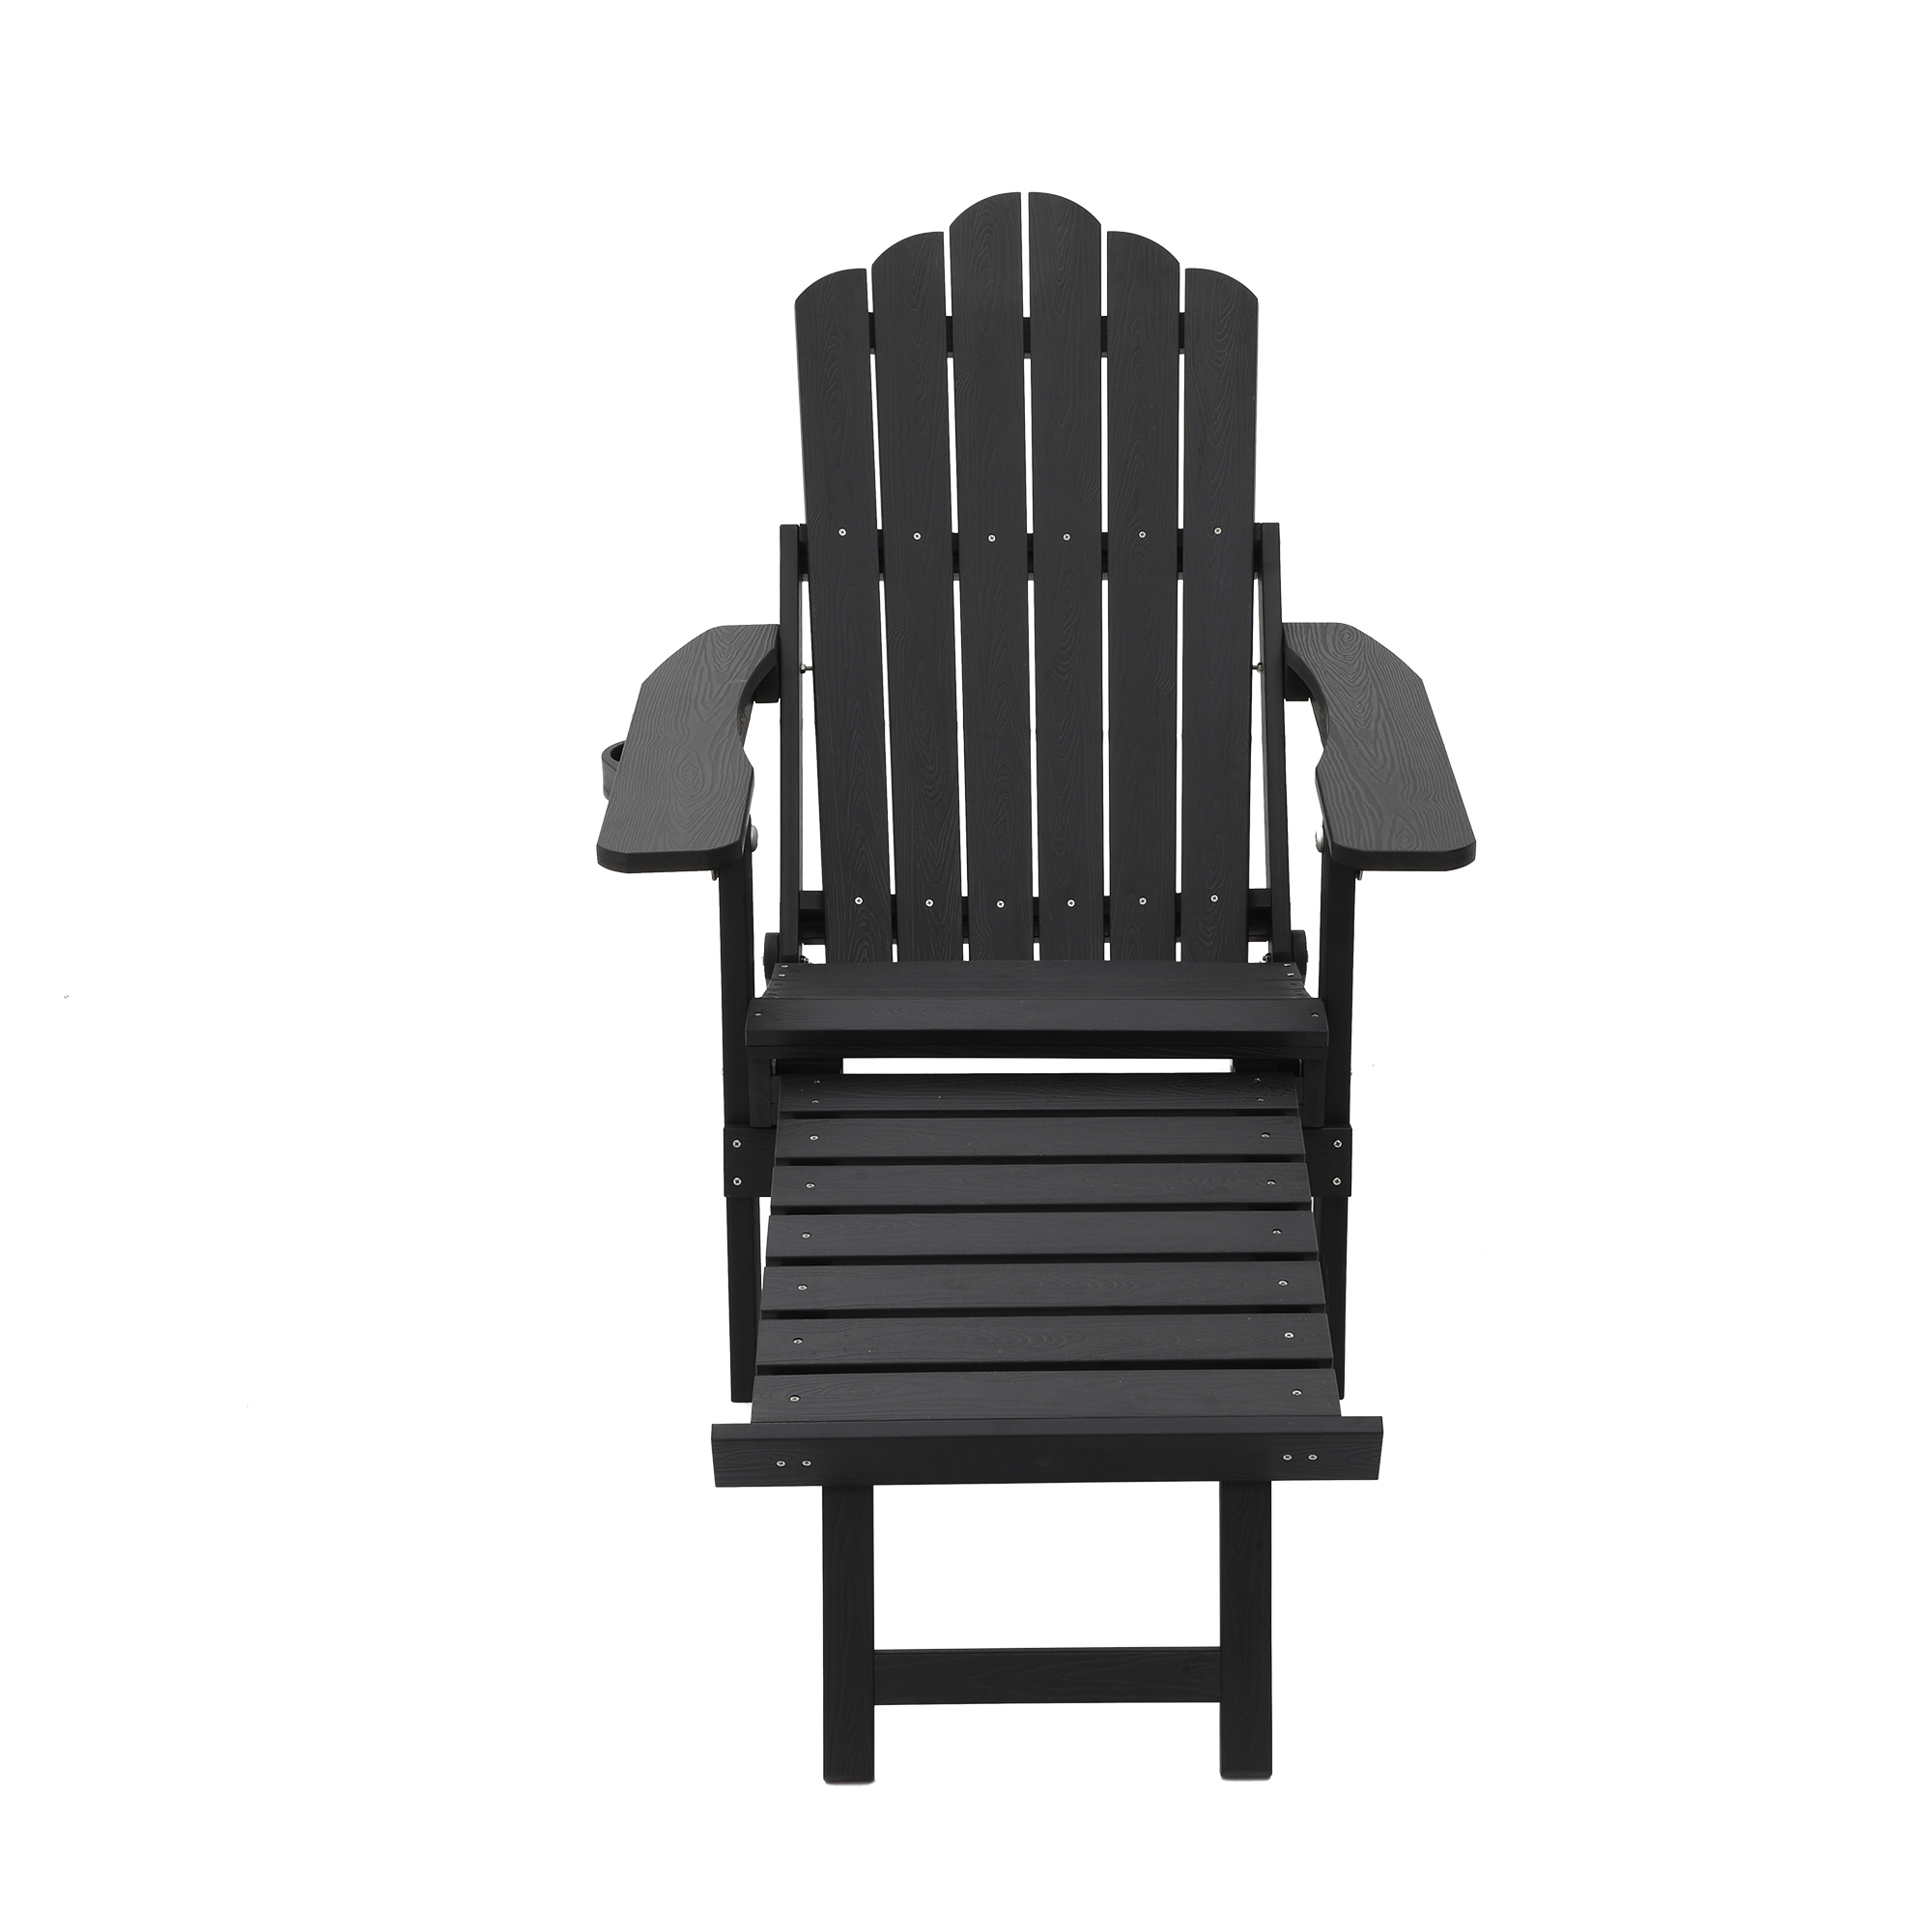 Outdoor Adirondack Chair Plastic Frame Stationary with Slat Seat